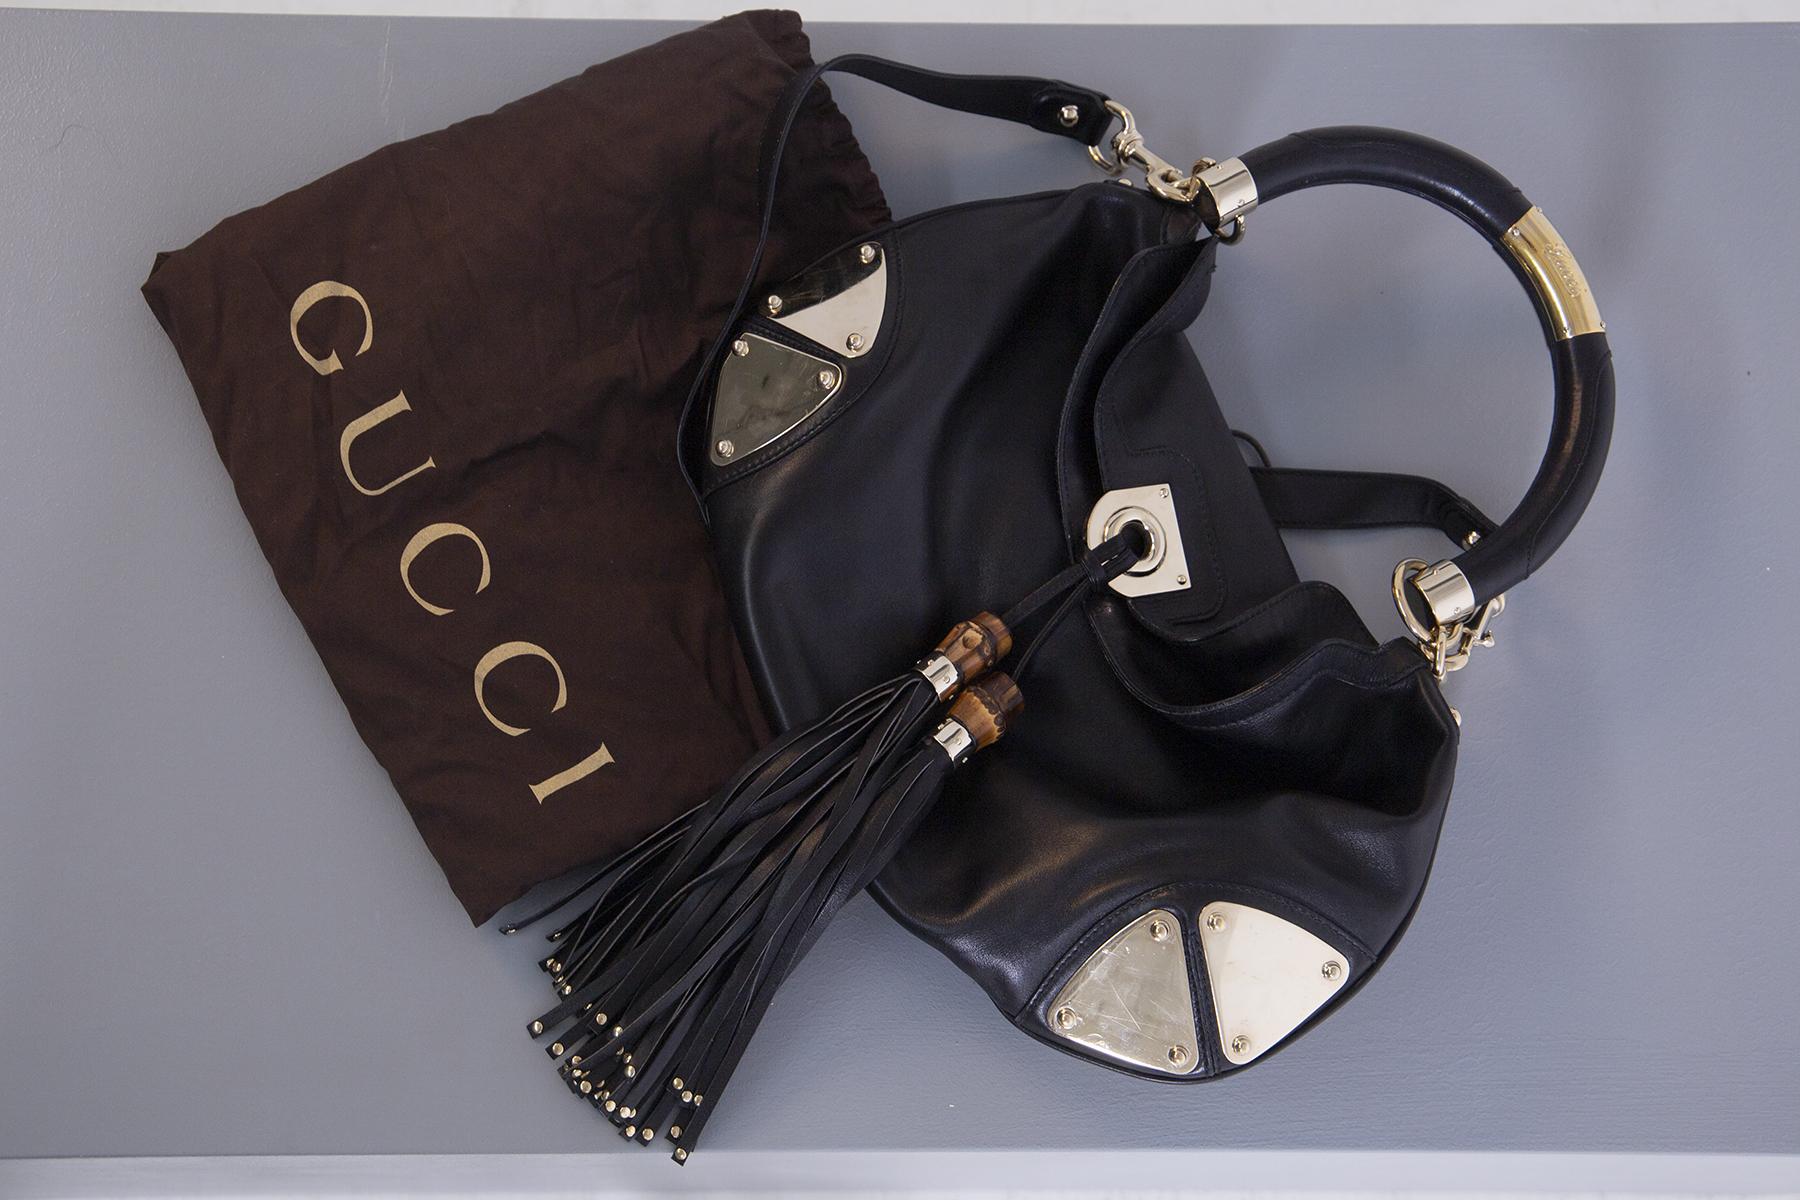 Elegant and fashionable Gucci Babouska Indy black shoulder bag. Made of leather and golden metal details still with its never used fur. This Gucci issue has a top with two tassels with bamboo details and a spacious fabric interior. It also features